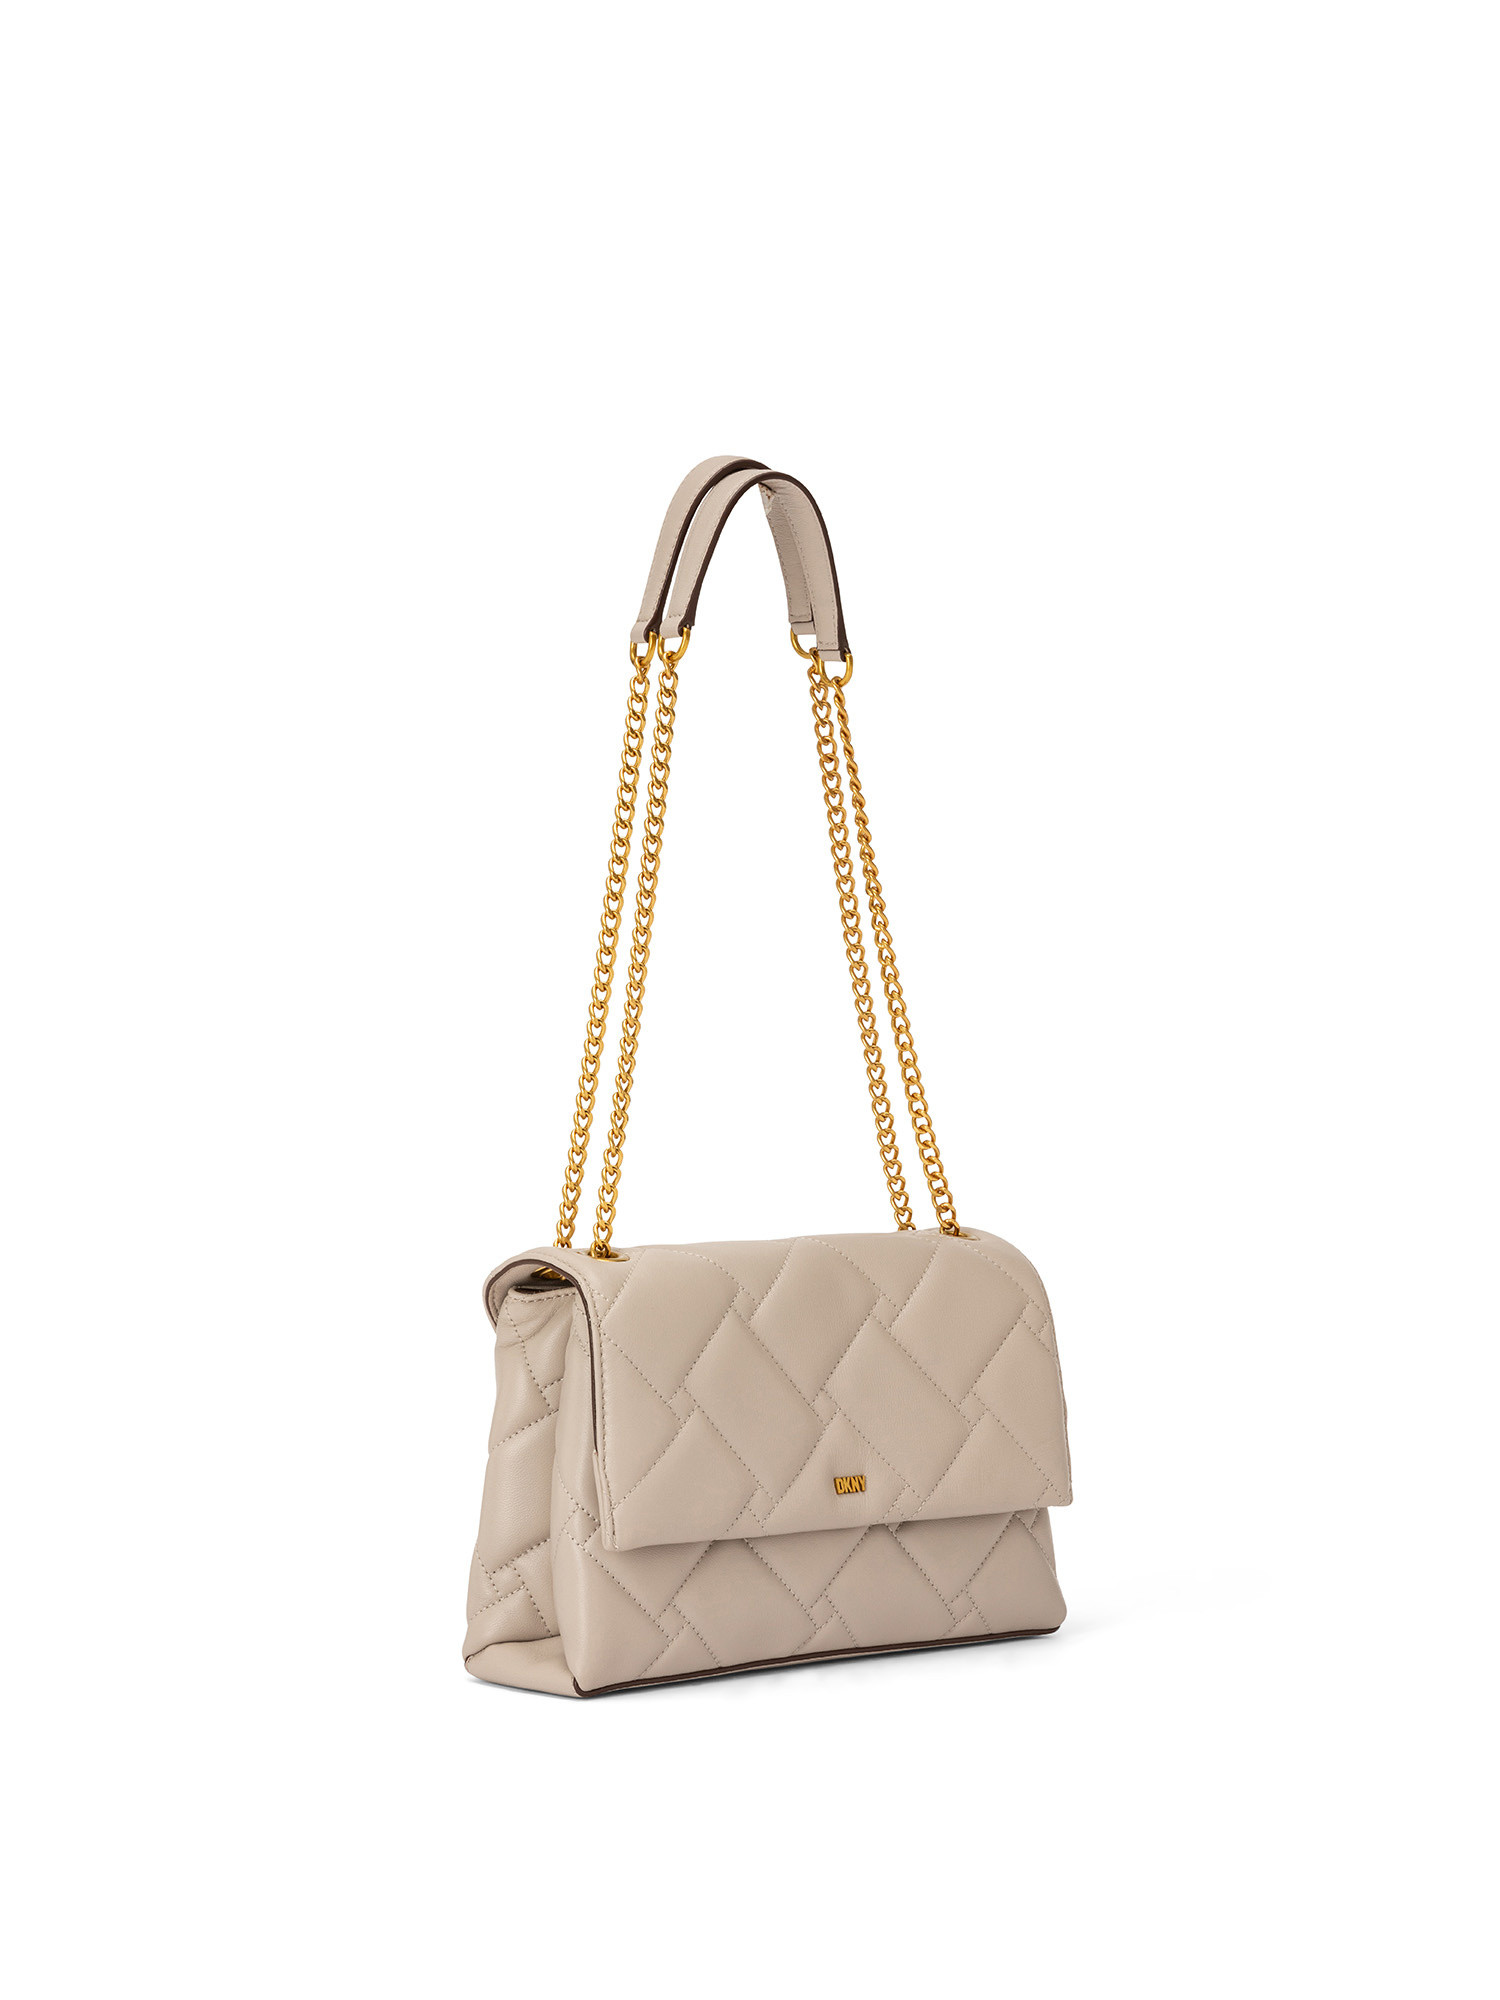 DKNY - Borsa a tracolla Willow, Beige, large image number 1